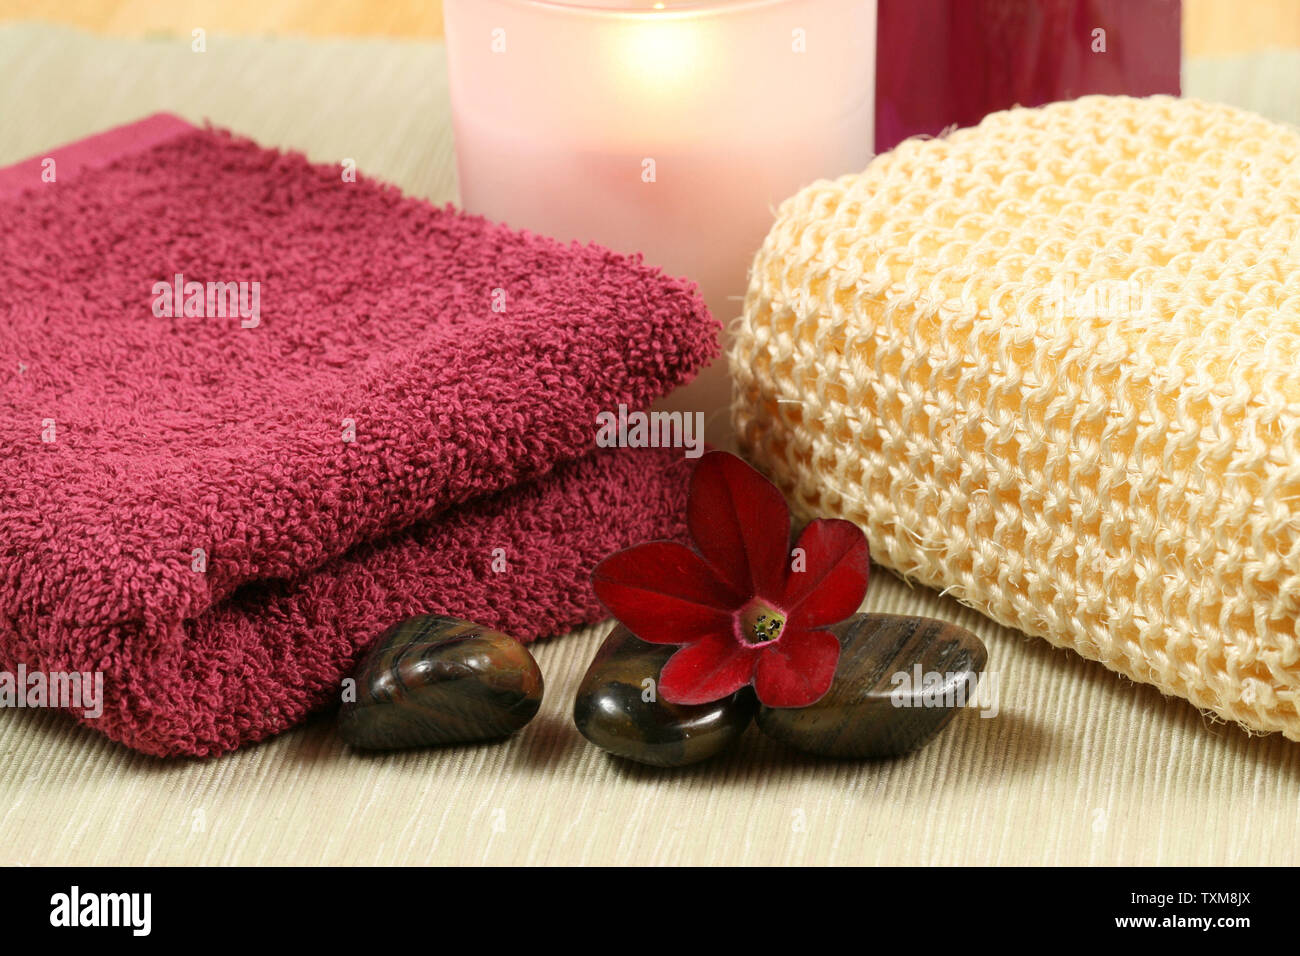 Luxury spa therapy in maroon color. Relaxation moments Stock Photo